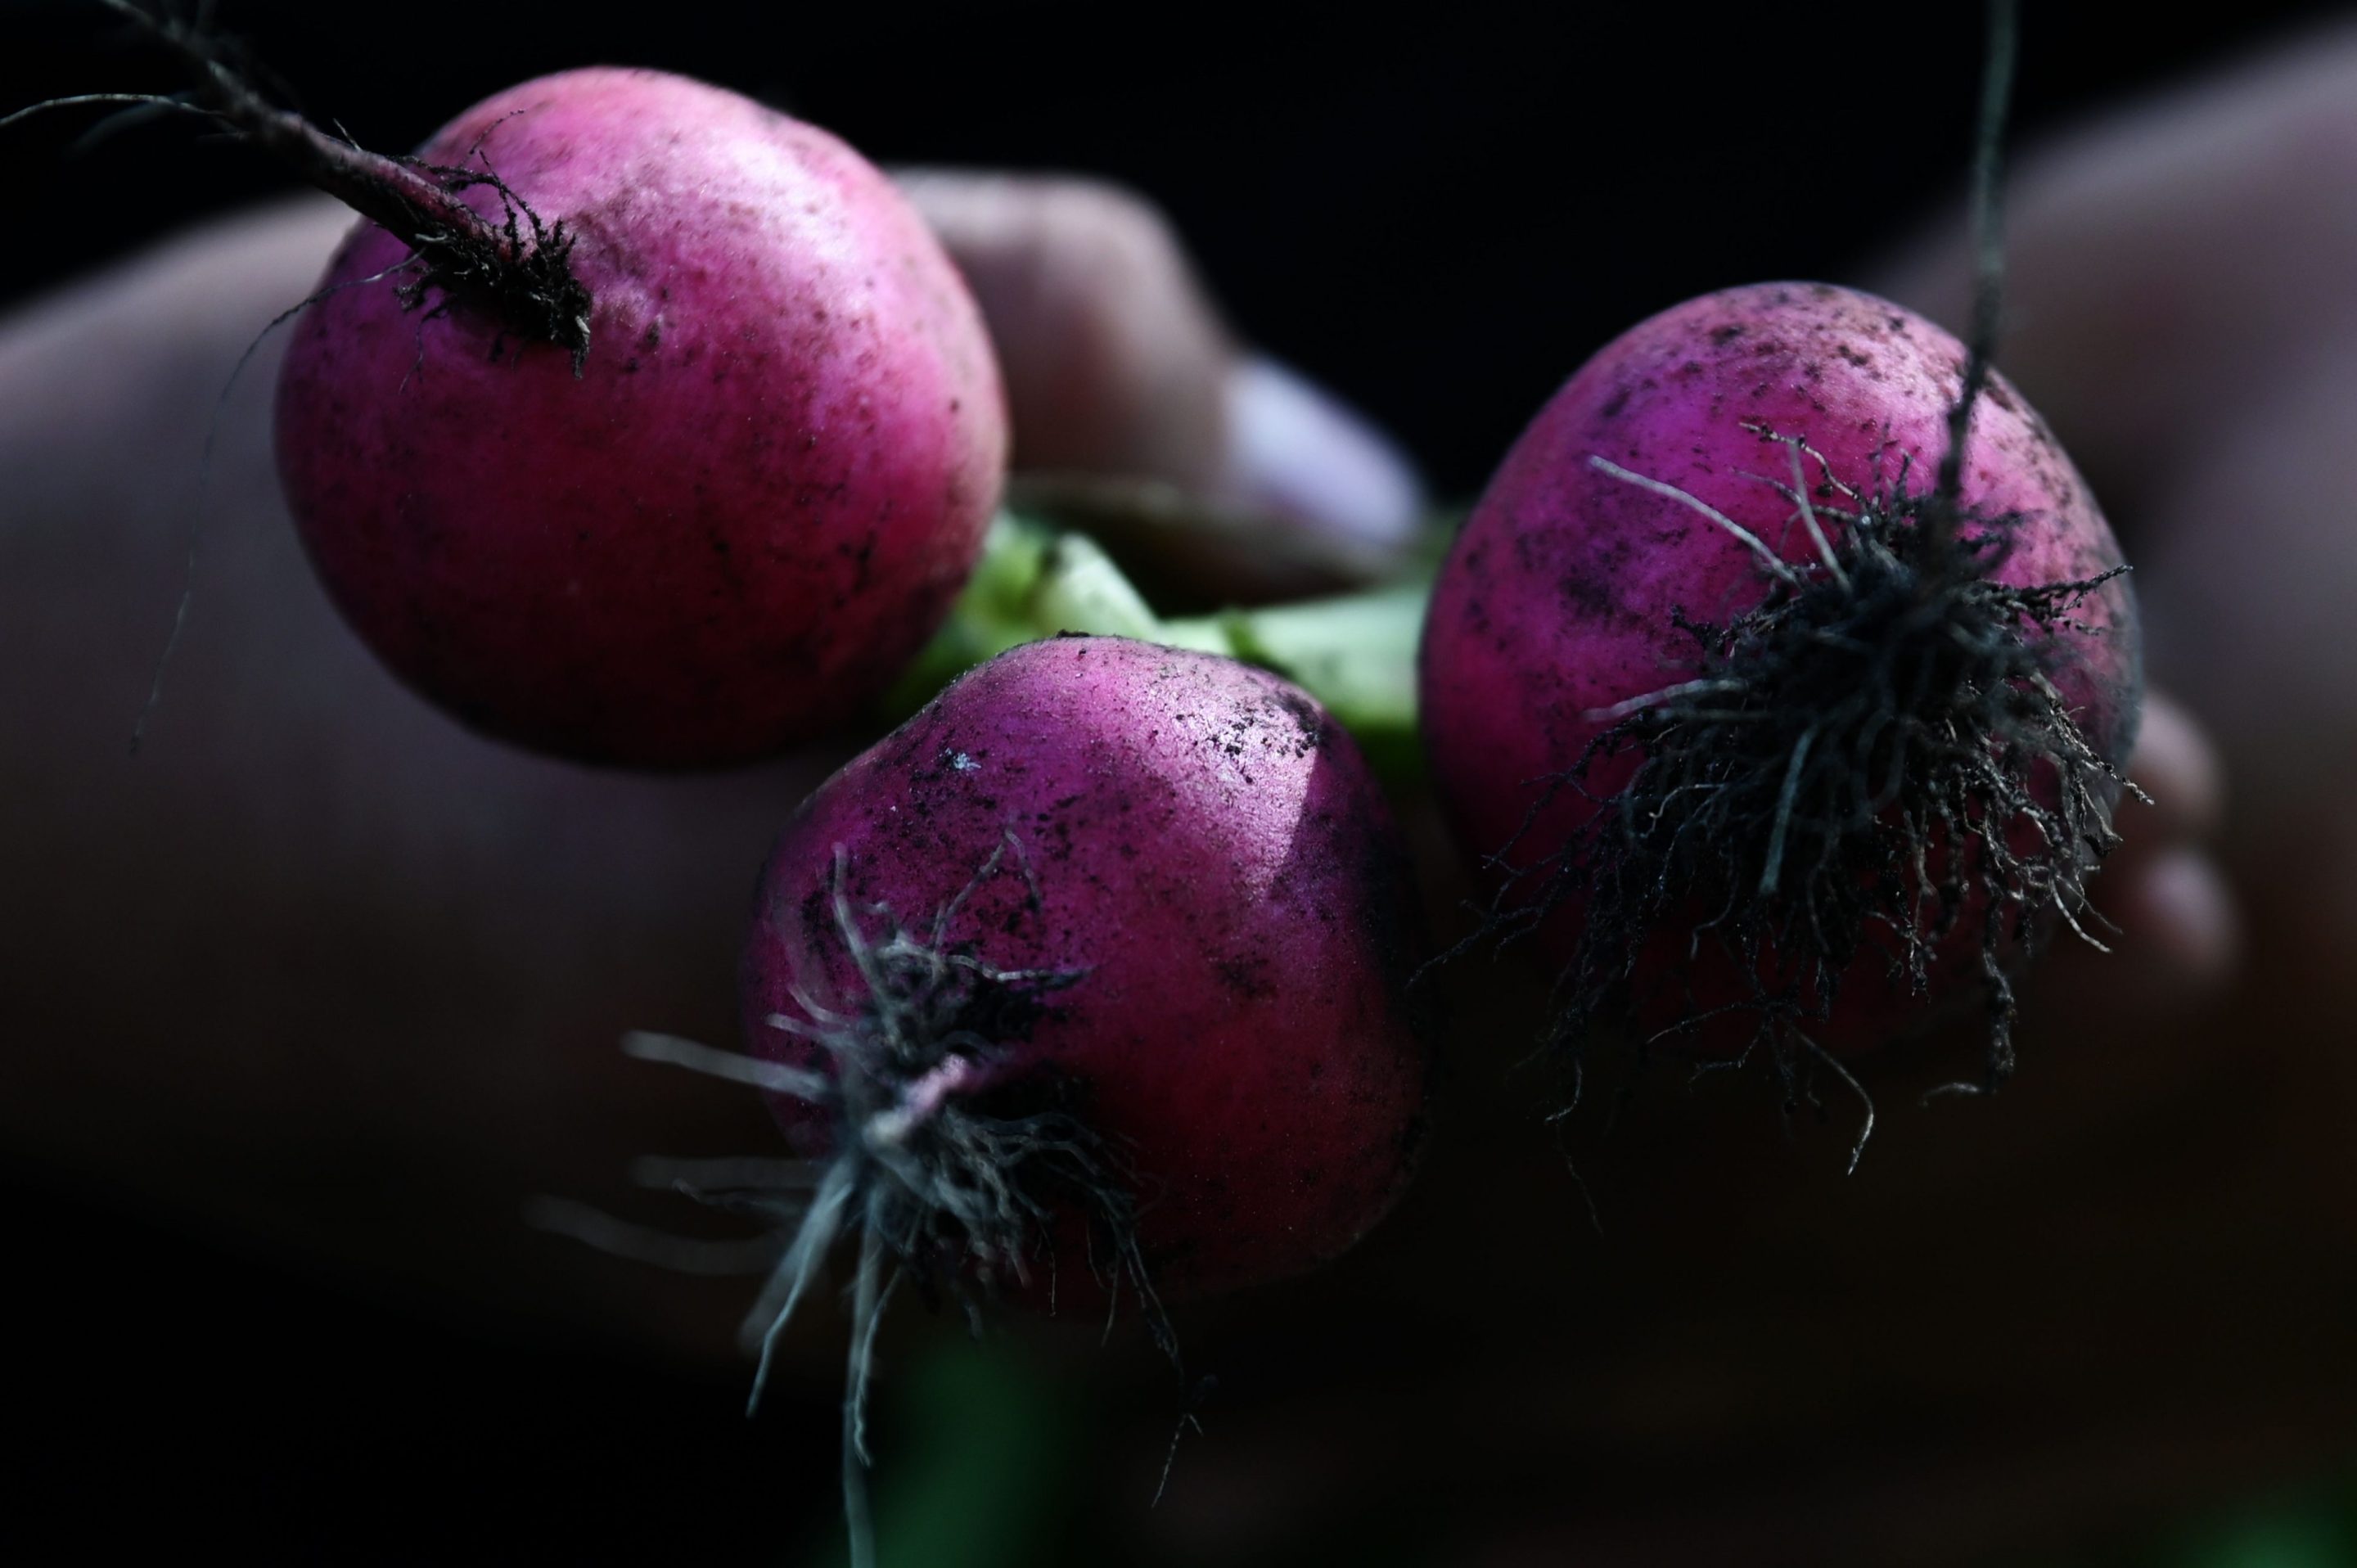 Some radishes, seen in close up.